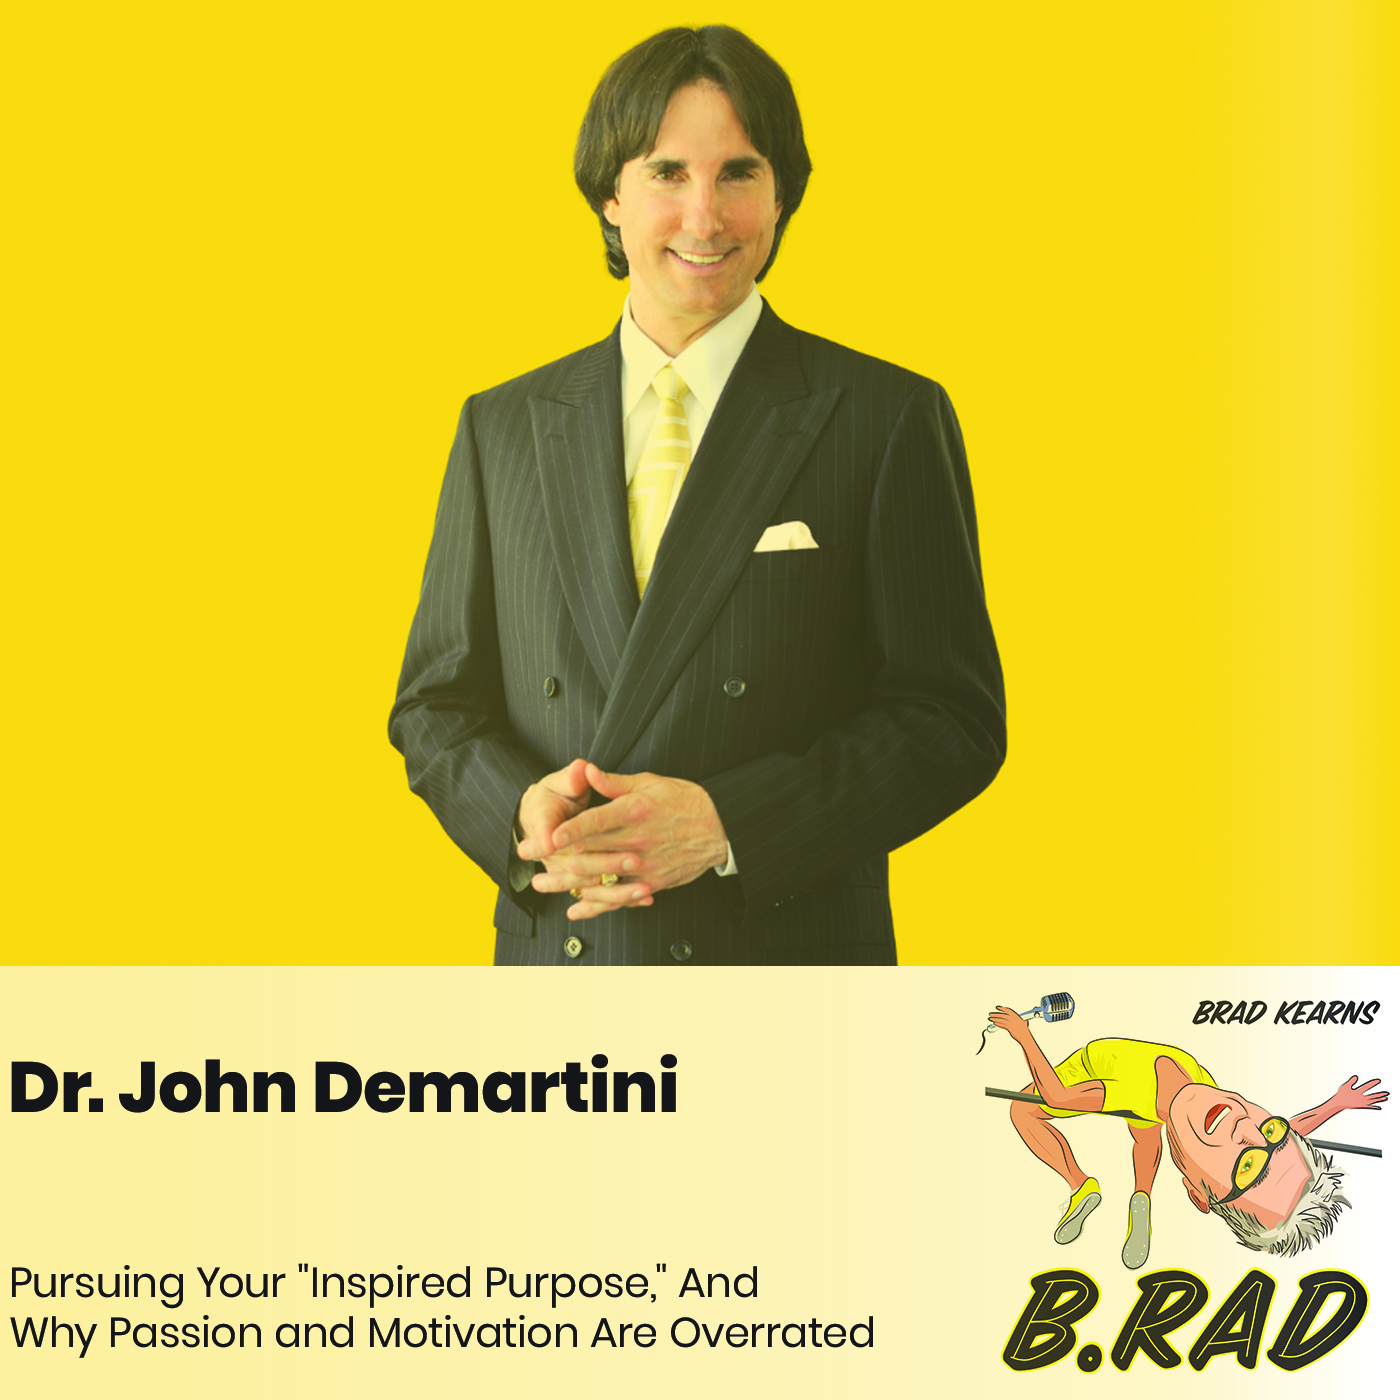 Dr. John Demartini: Pursuing Your "Inspired Purpose," And Why Passion and Motivation Are Overrated